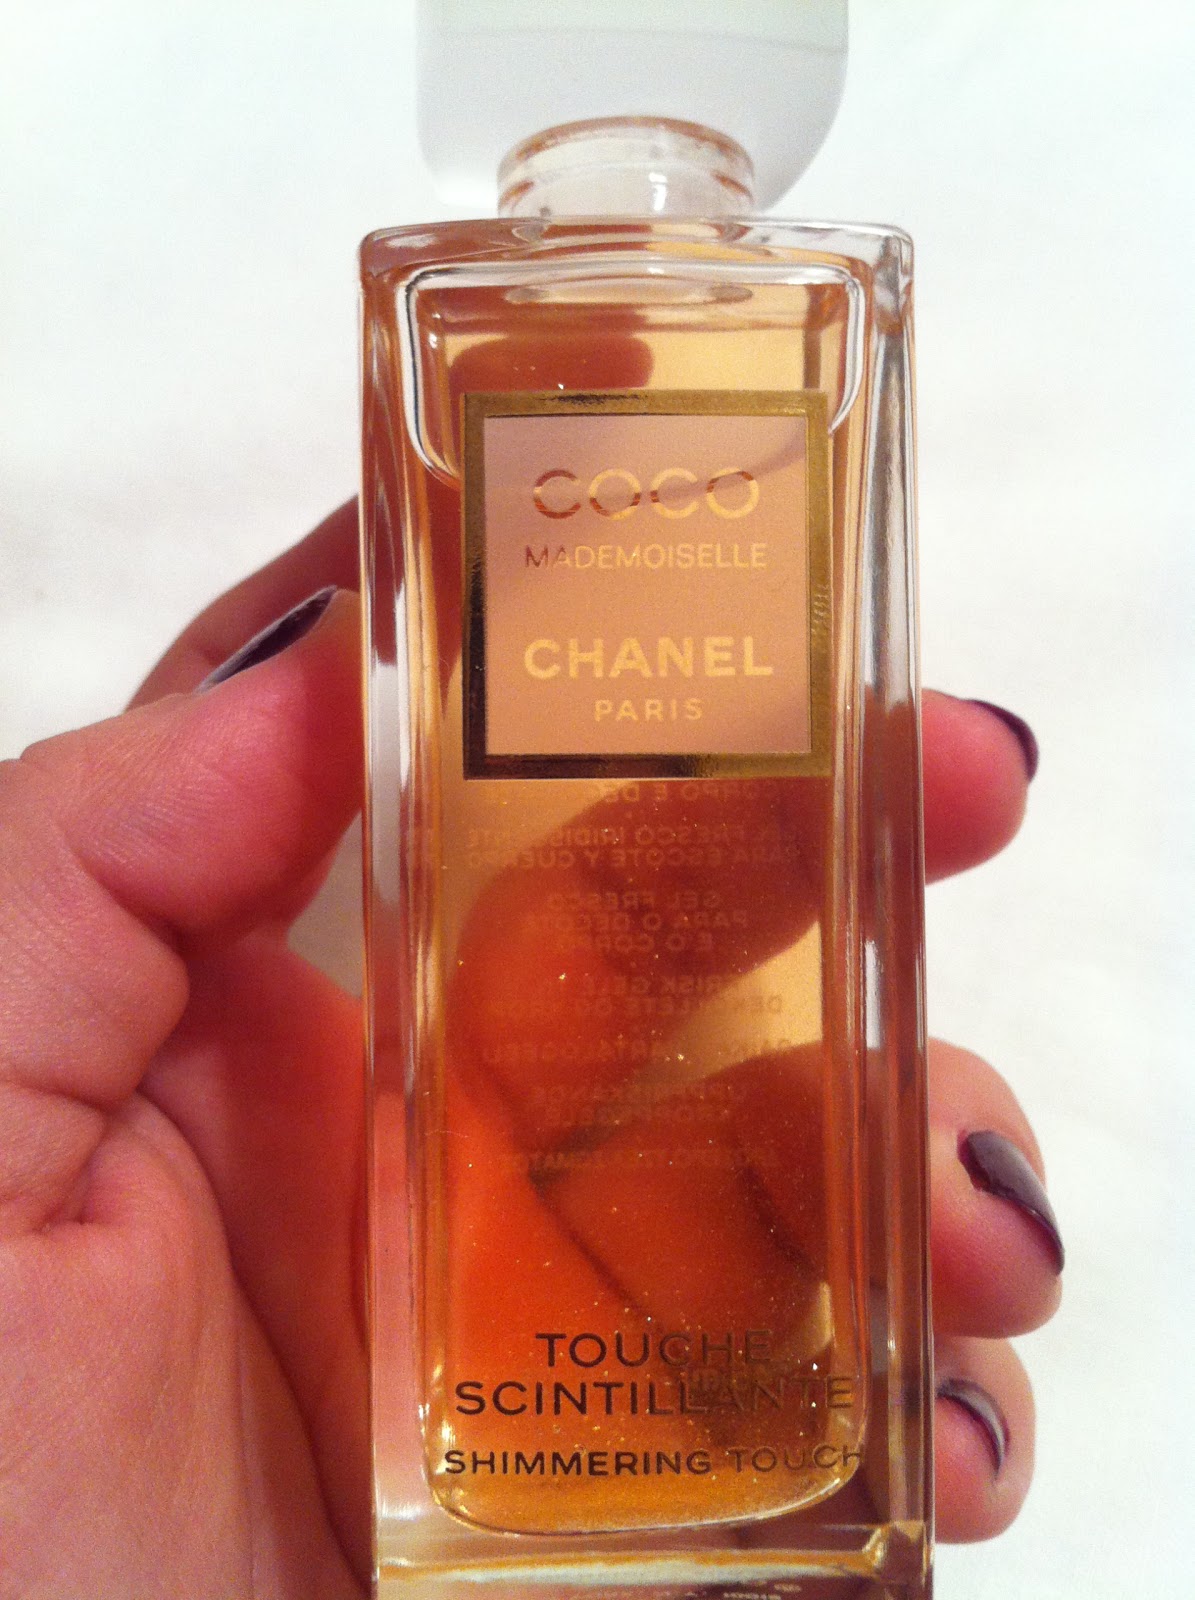 Beauty Banter: Beauty Review: Chanel Coco Mademoiselle Touche